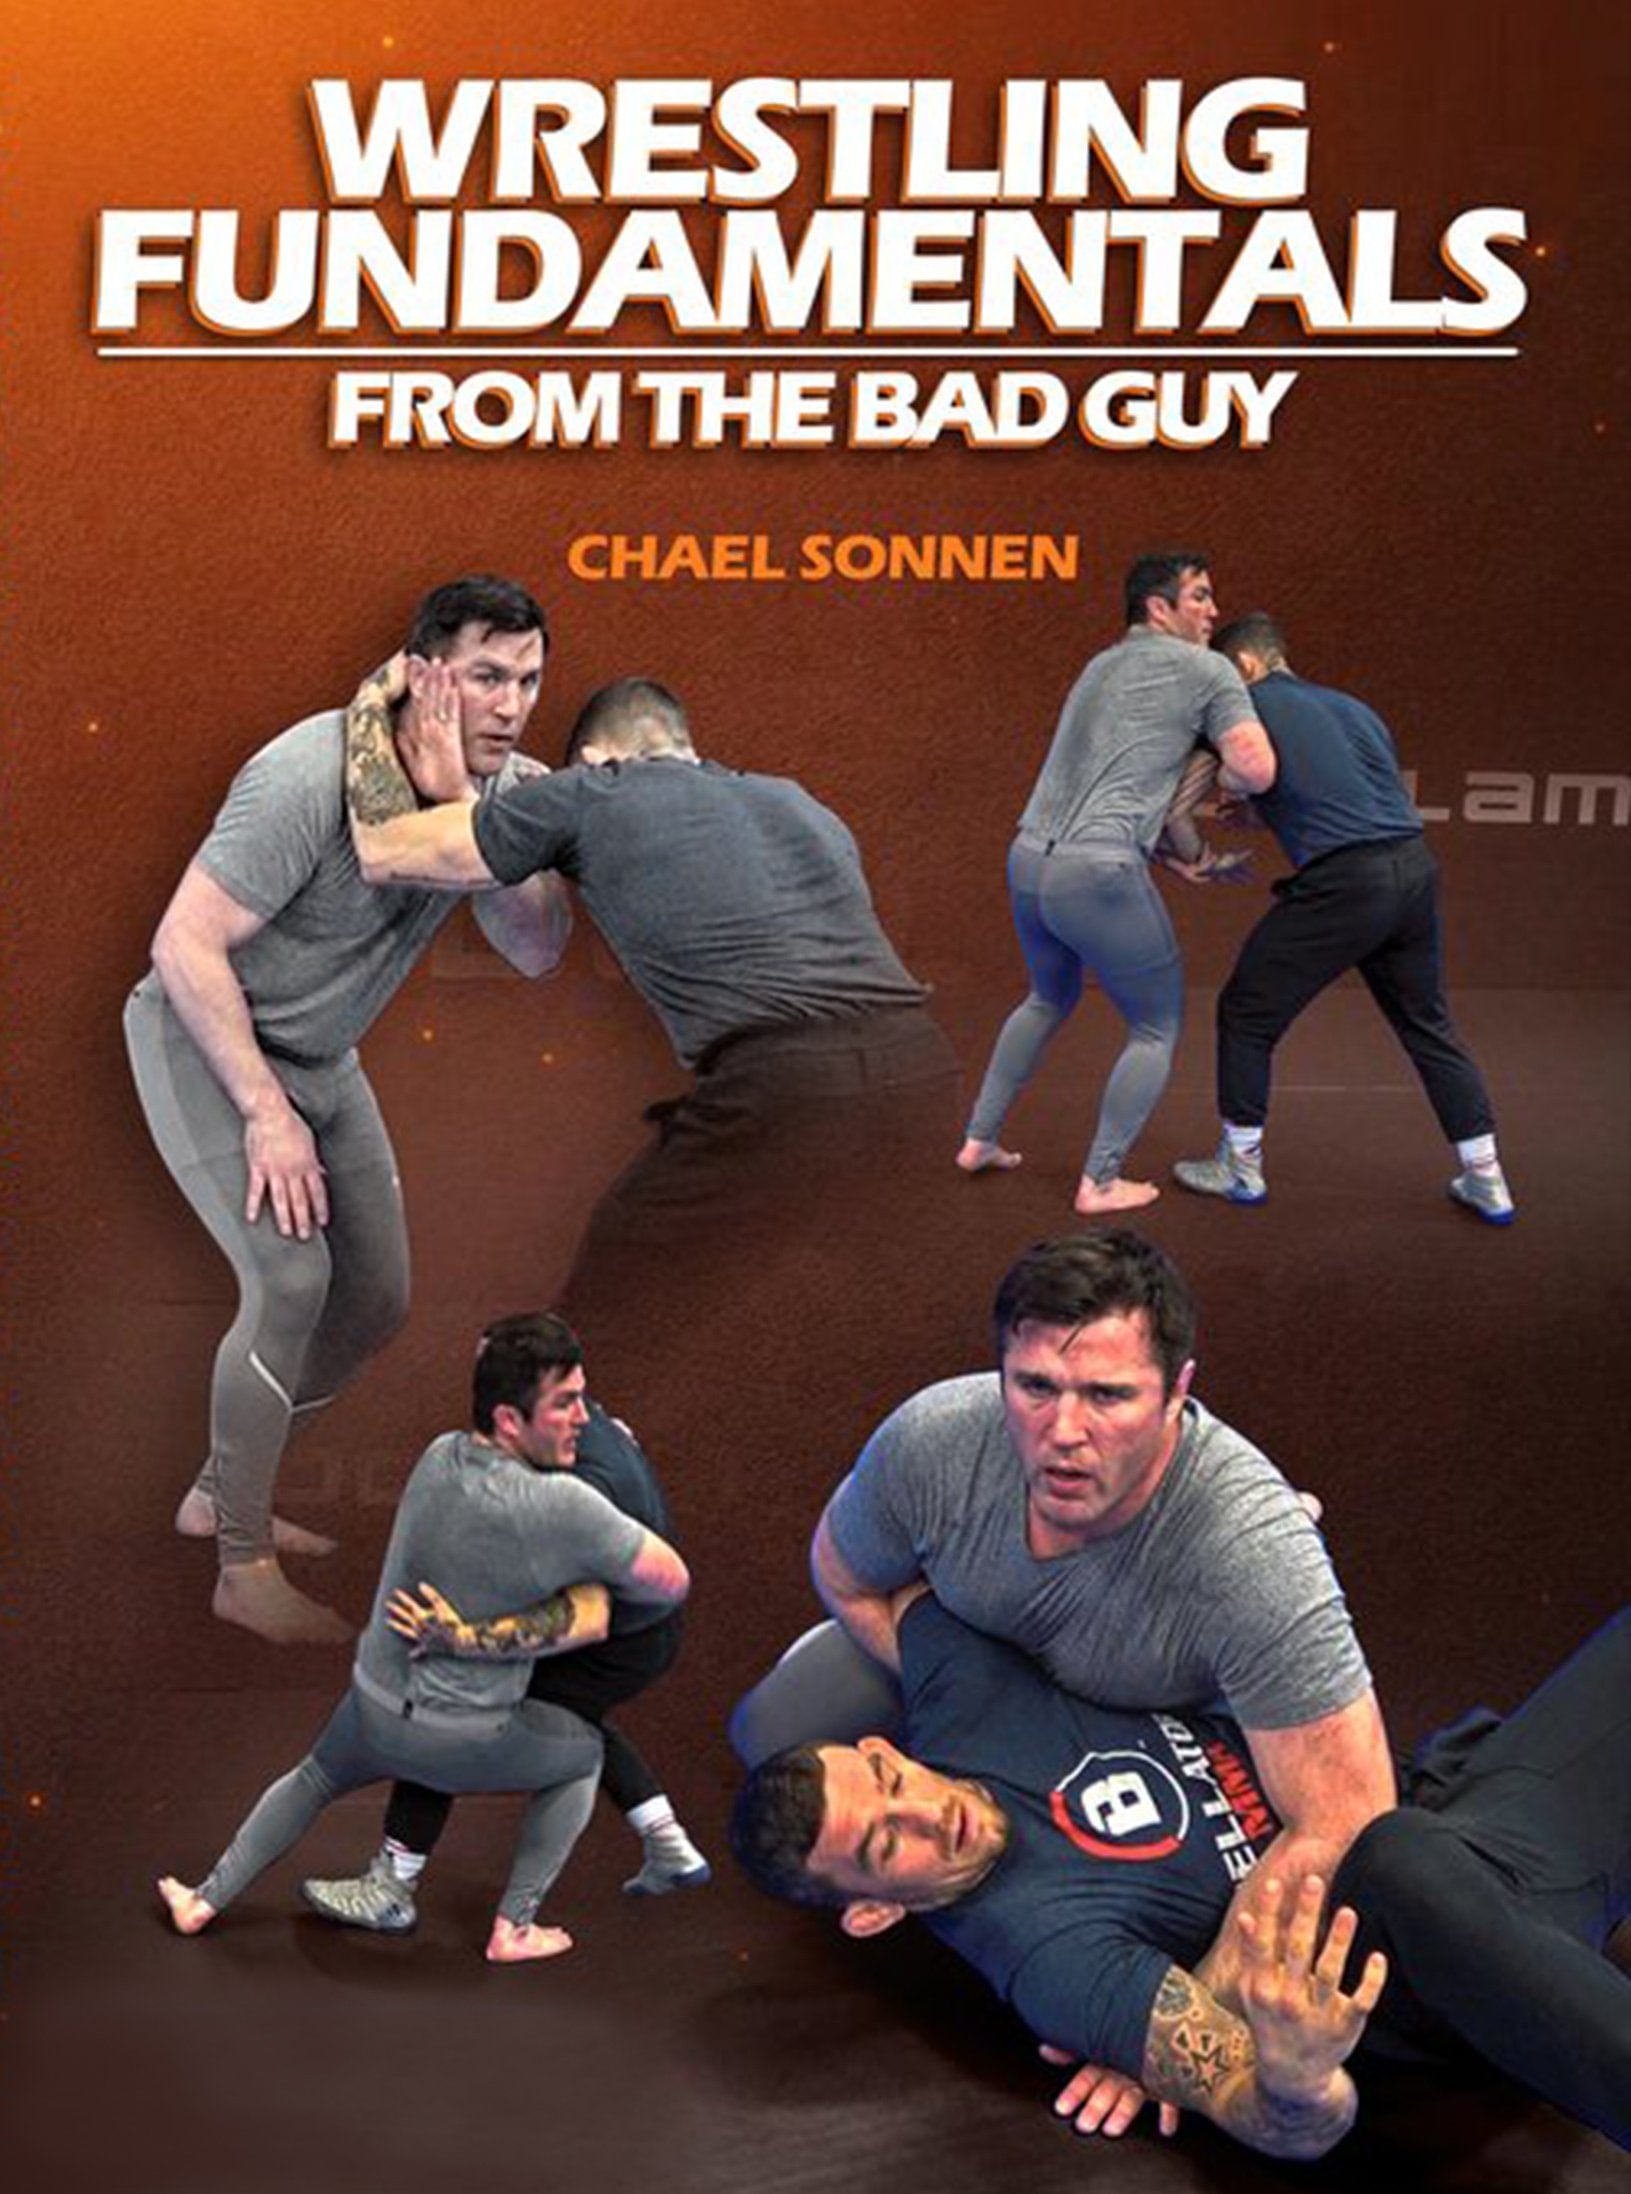 Wrestling Fundamentals From The Bad Guy by Chael Sonnen - Fanatic Wrestling